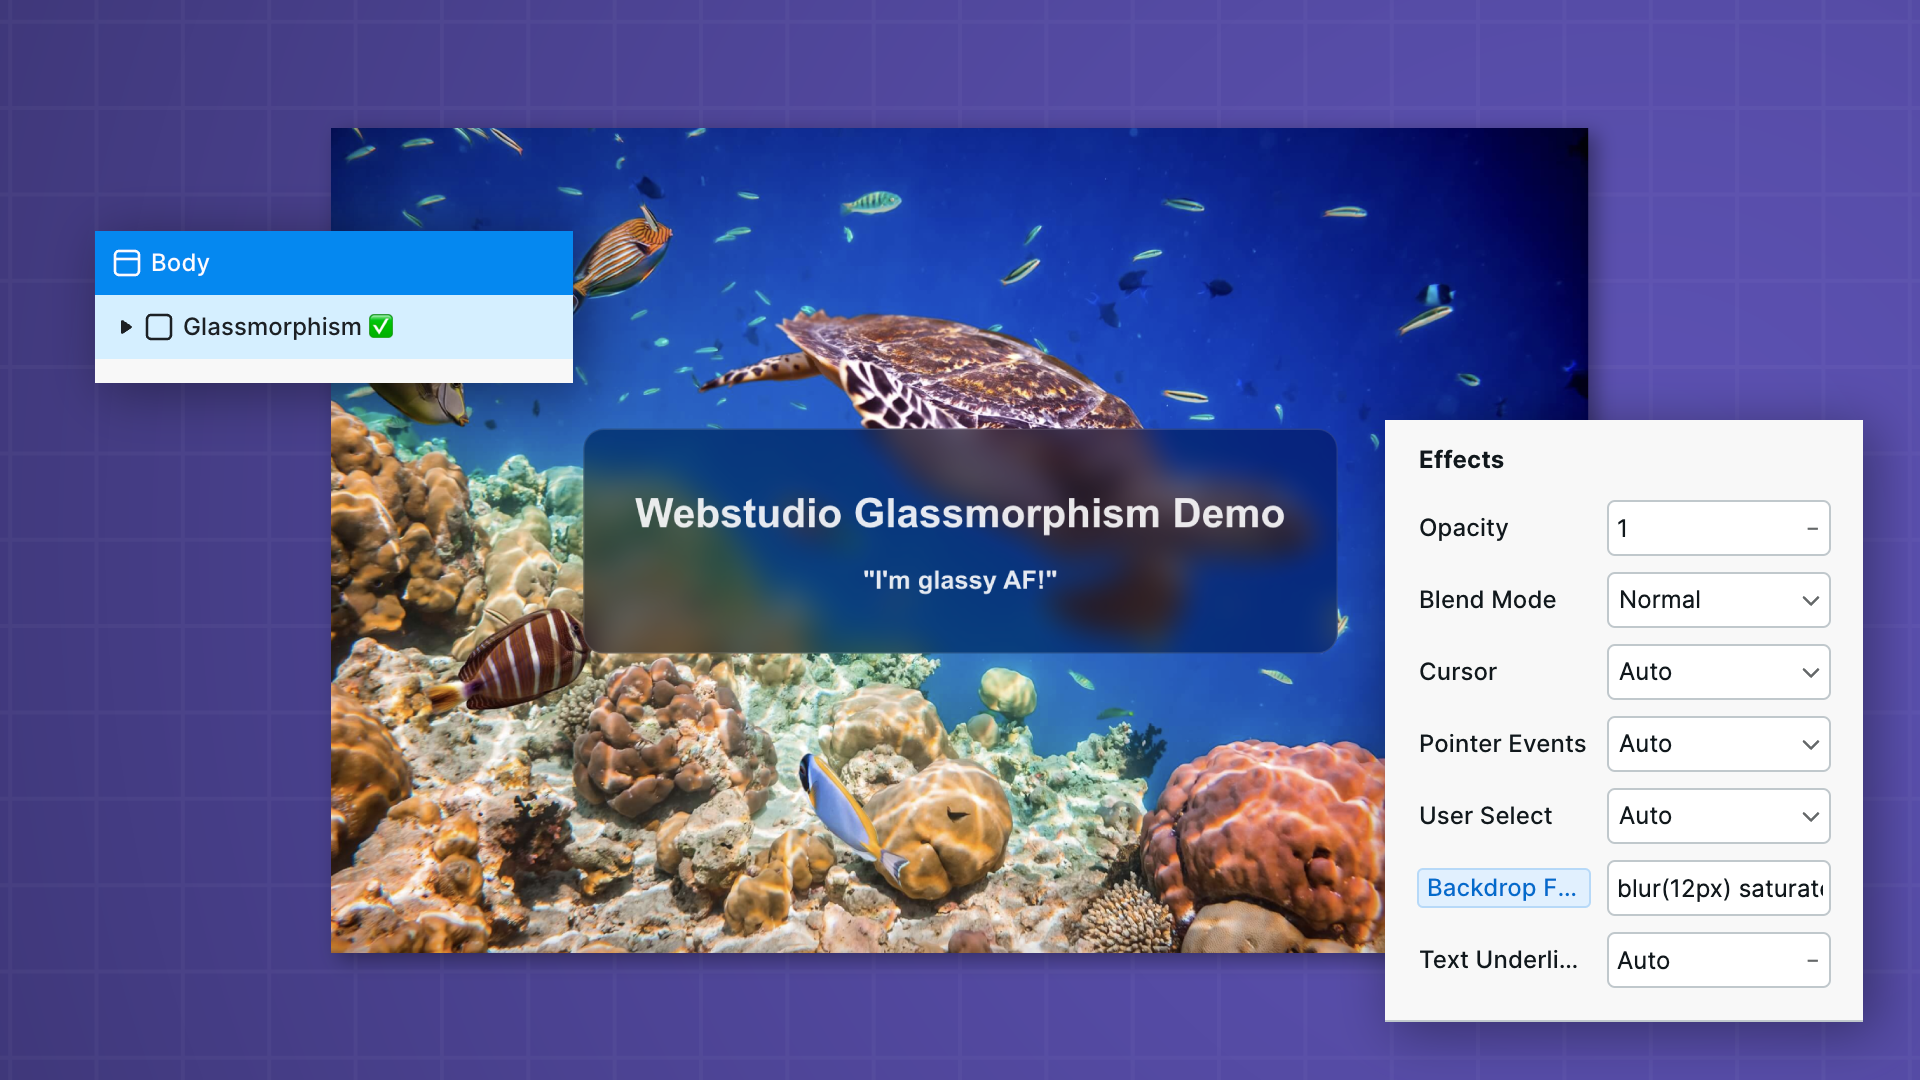 "Glassmorphism on Webstudio" with demo and components that create the blur effect